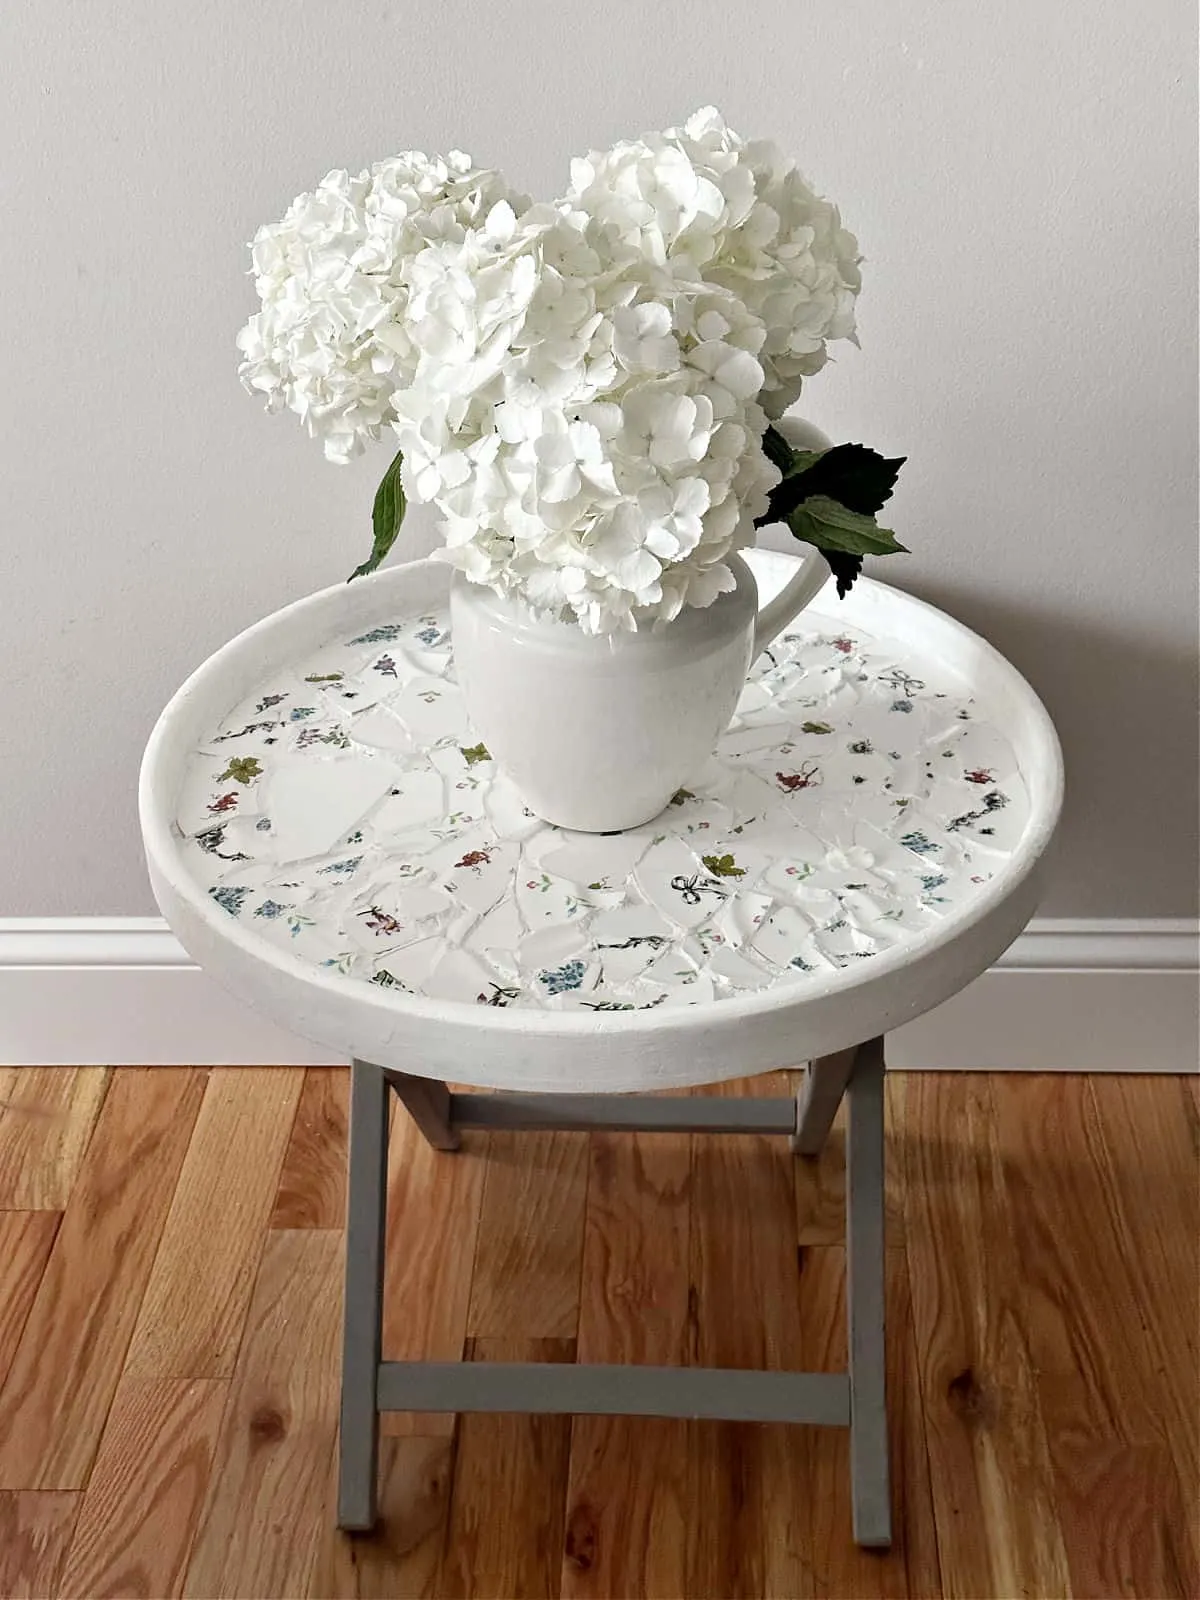 broken plate mosaic table top with flowers